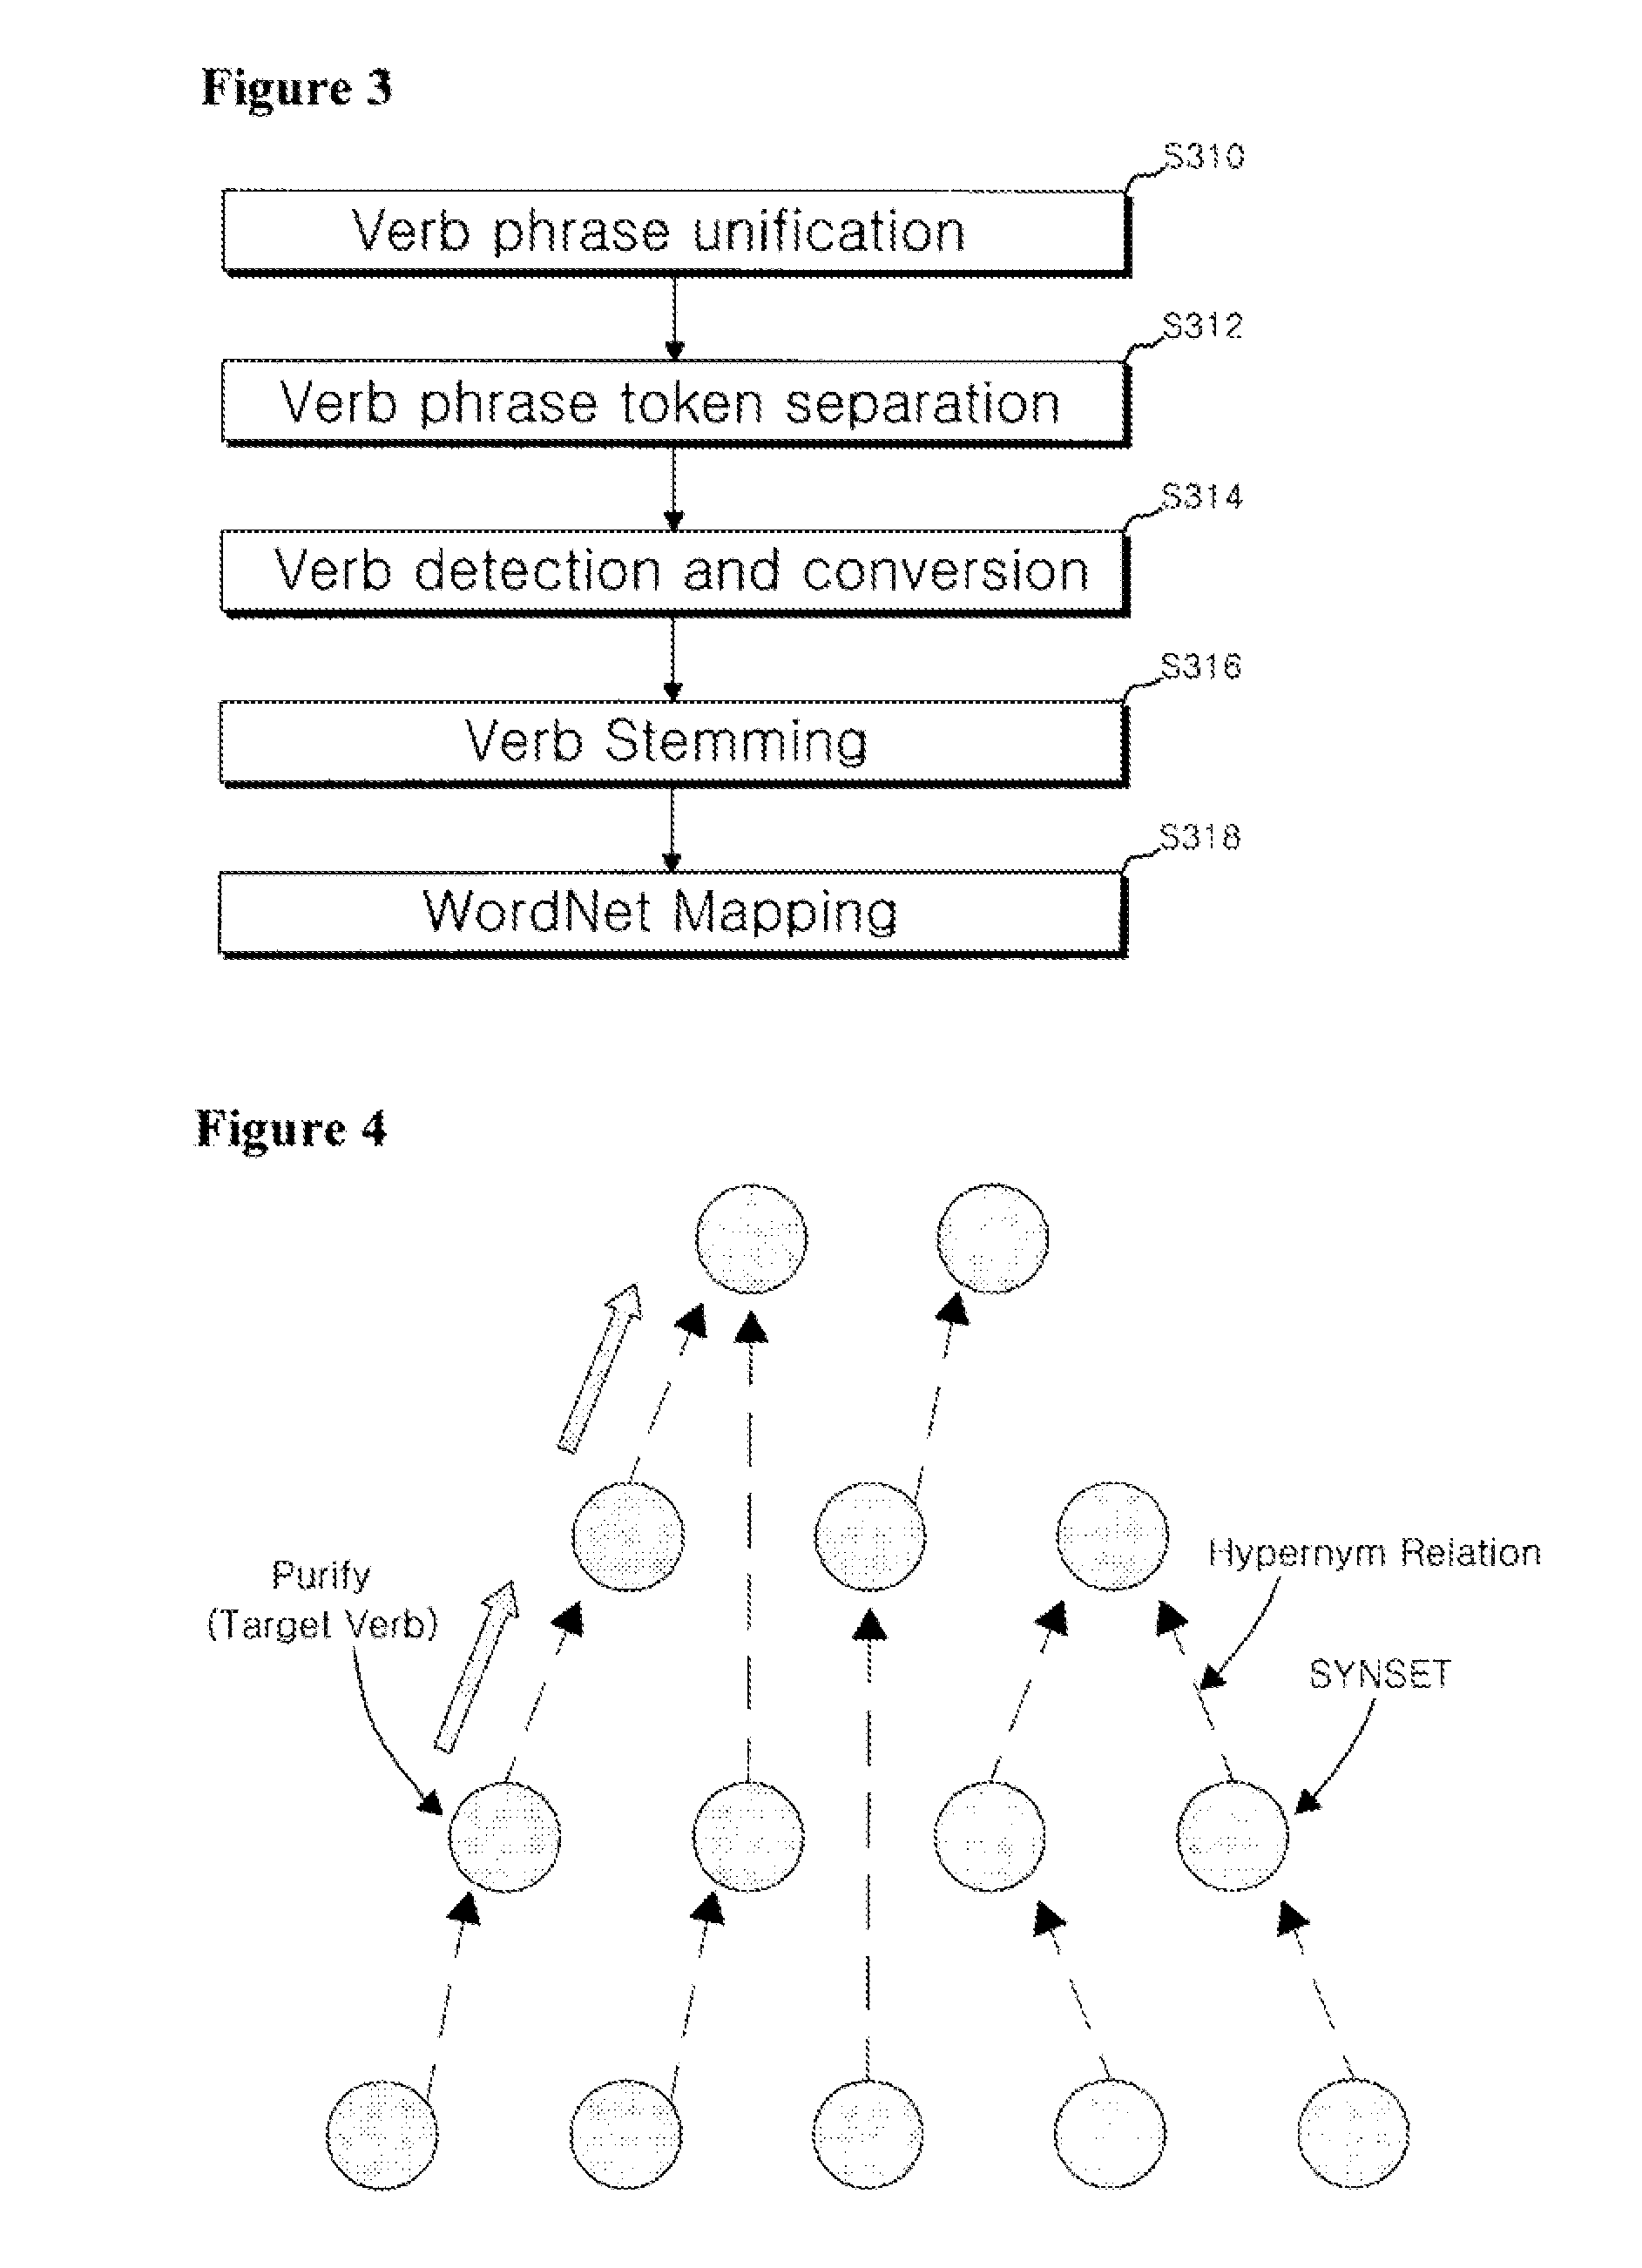 System for extracting ralation between technical terms in large collection using a verb-based pattern